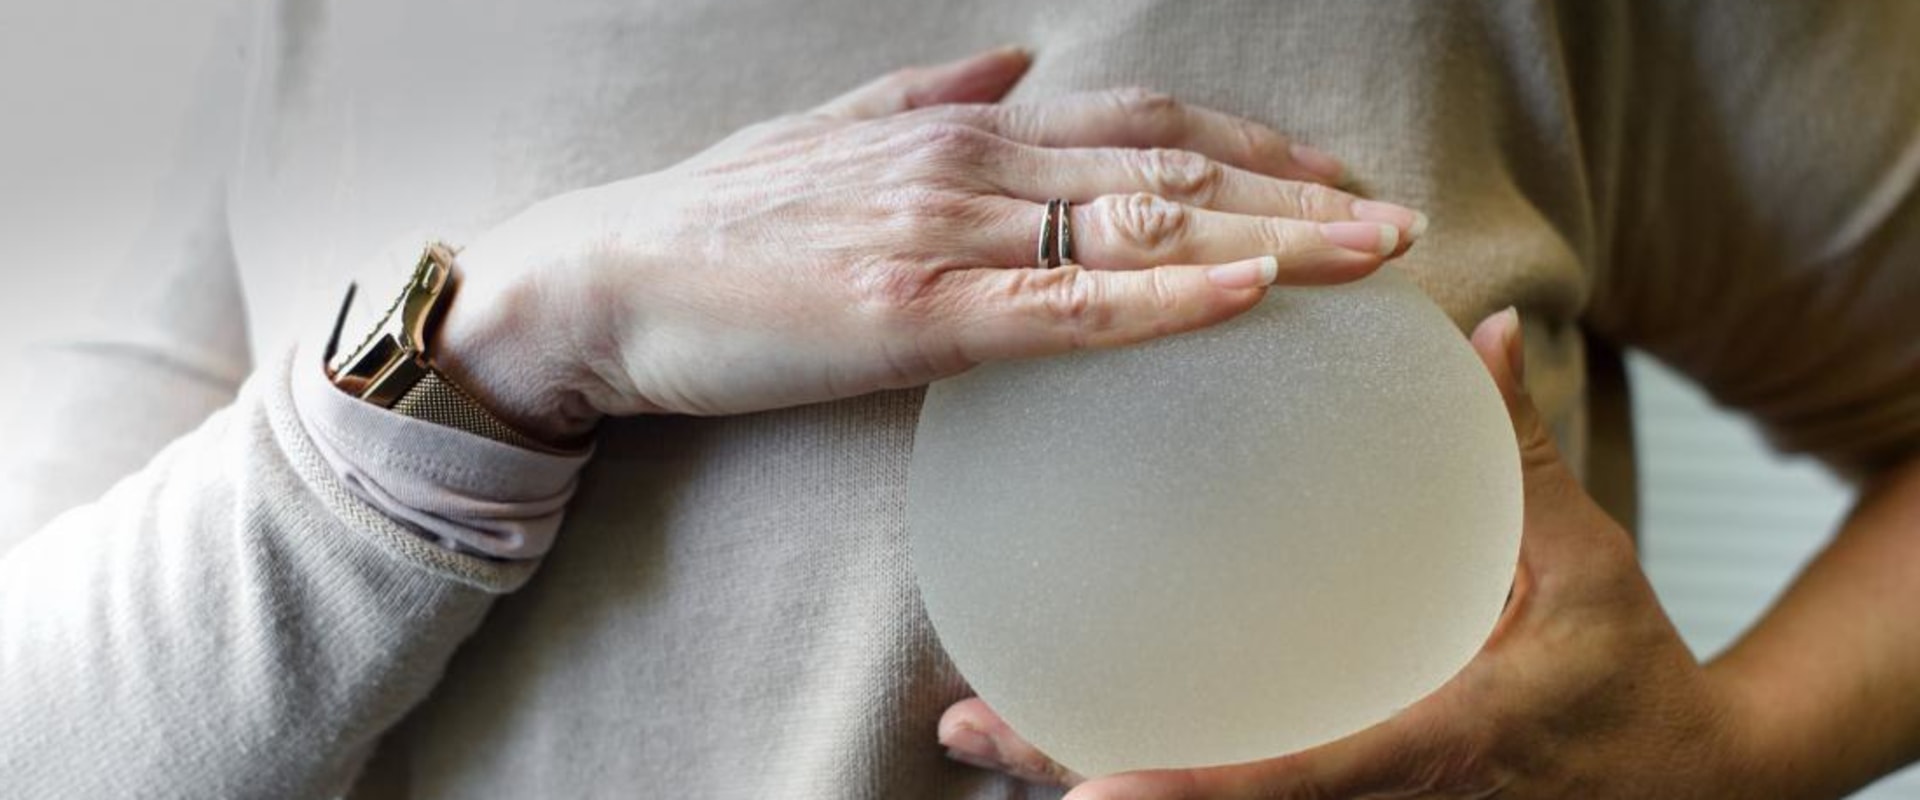 Do breast implants have long-term side effects?